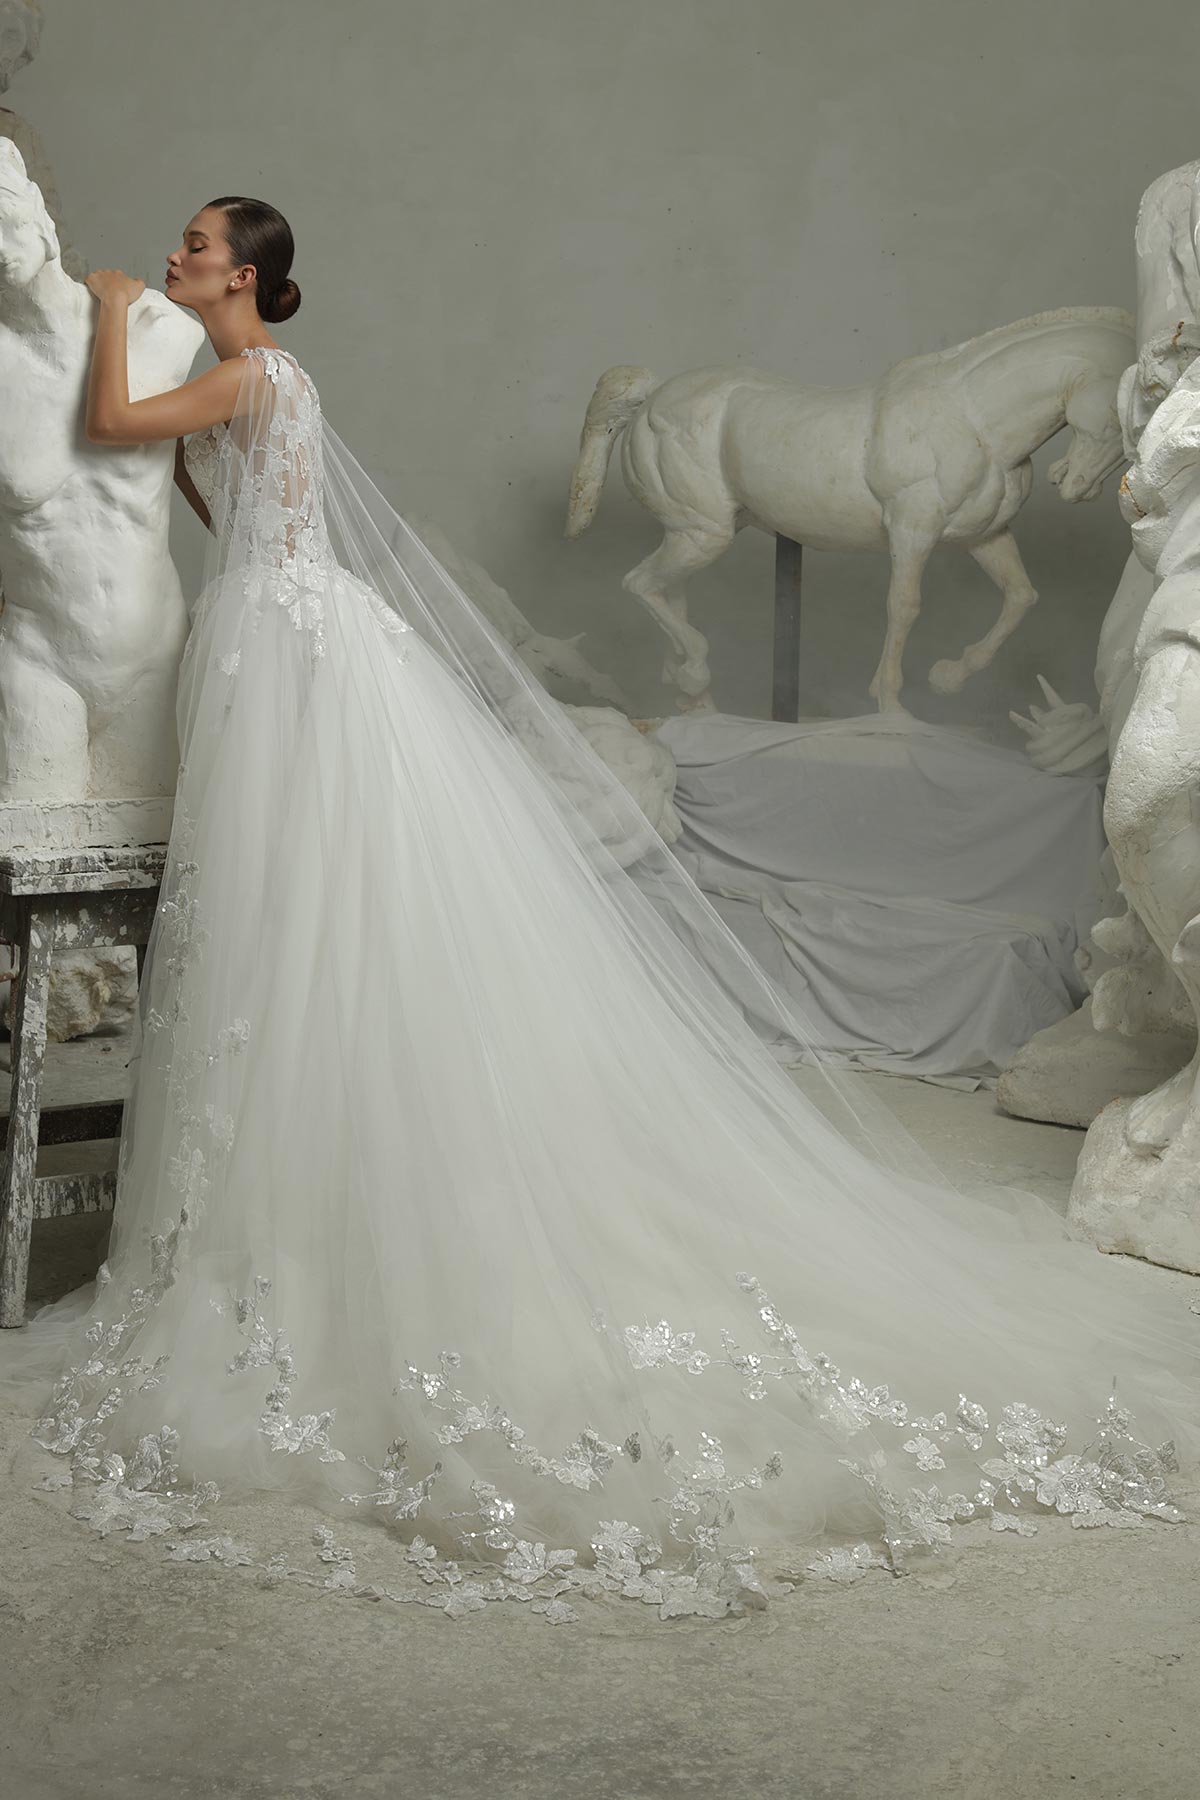 Picture of LAVENDER IVORY BİDAL GOWN